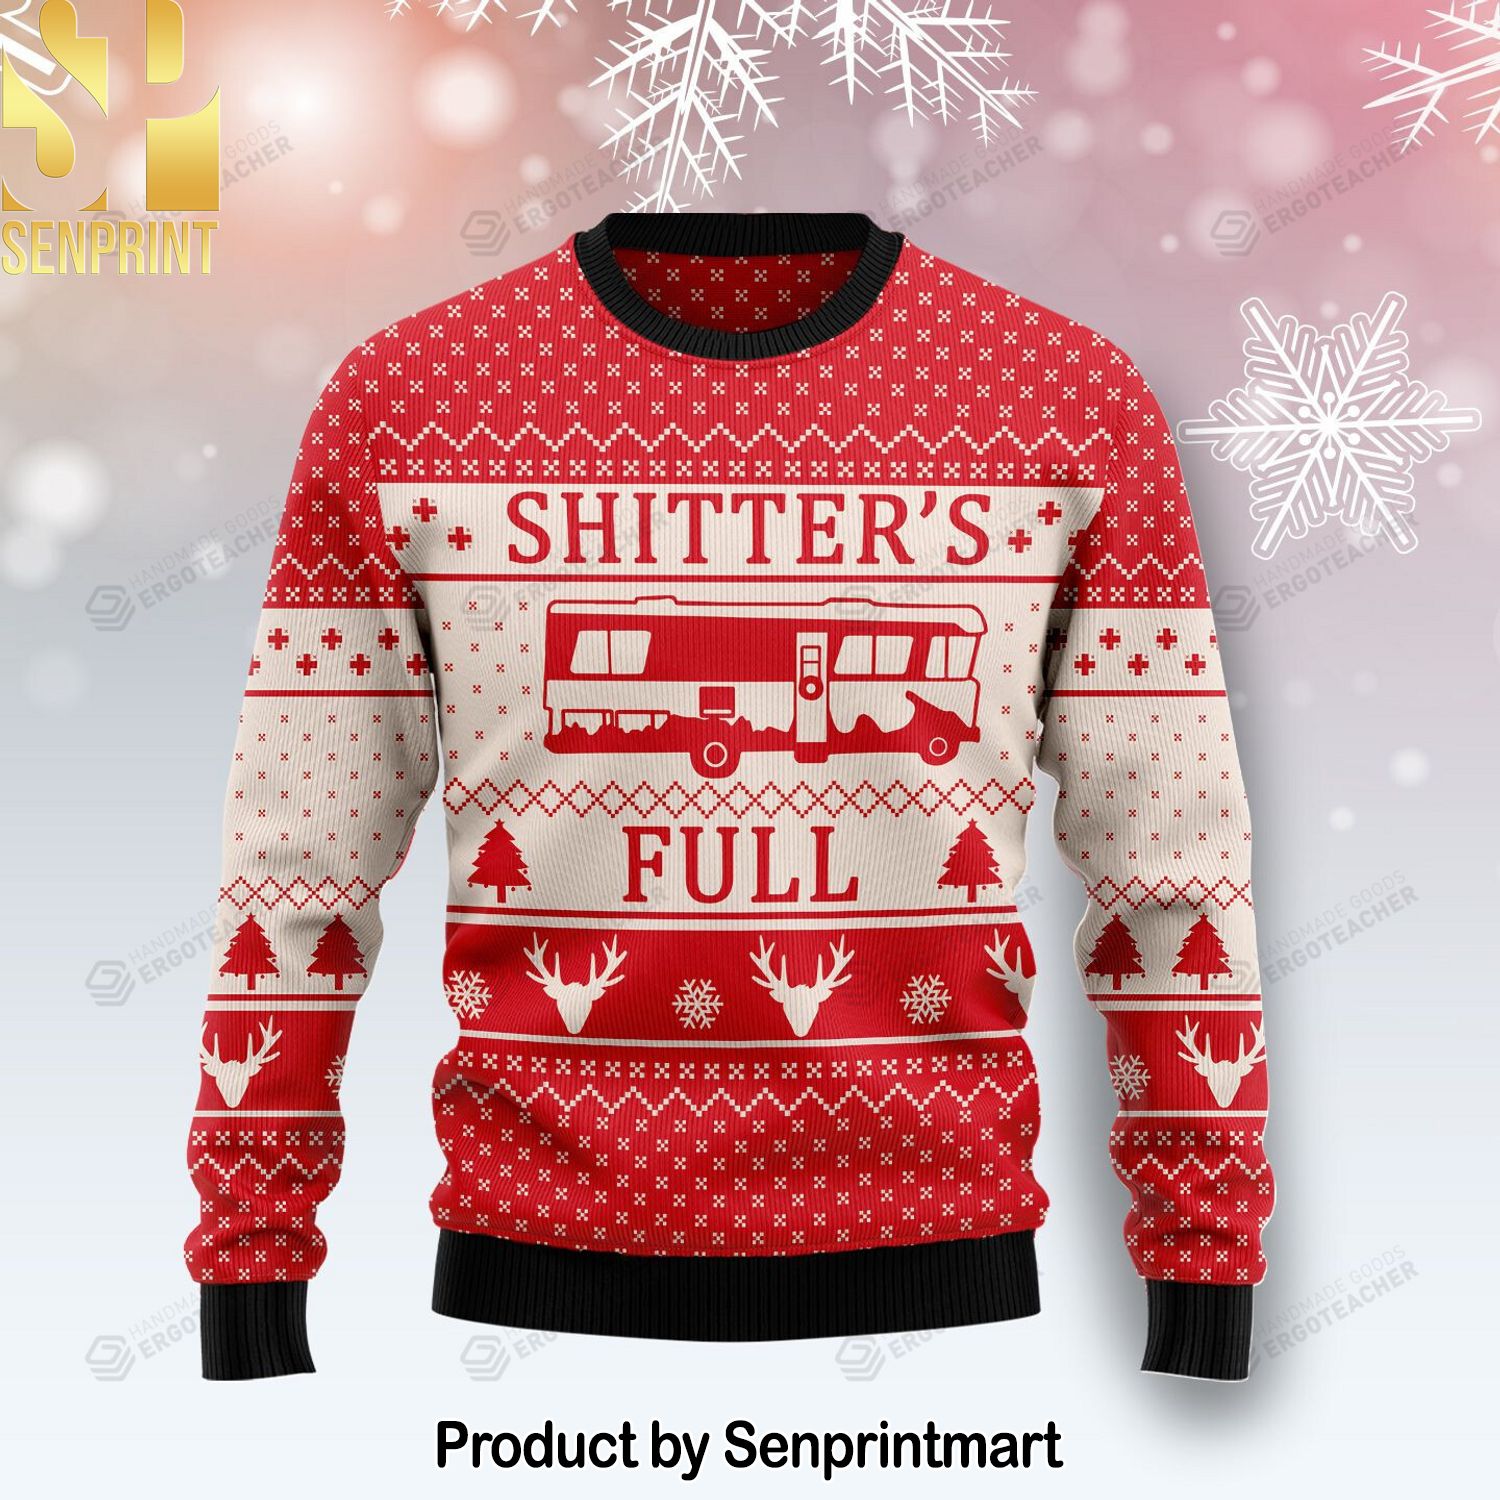 Shitter‘s Full For Christmas Gifts Ugly Christmas Holiday Sweater